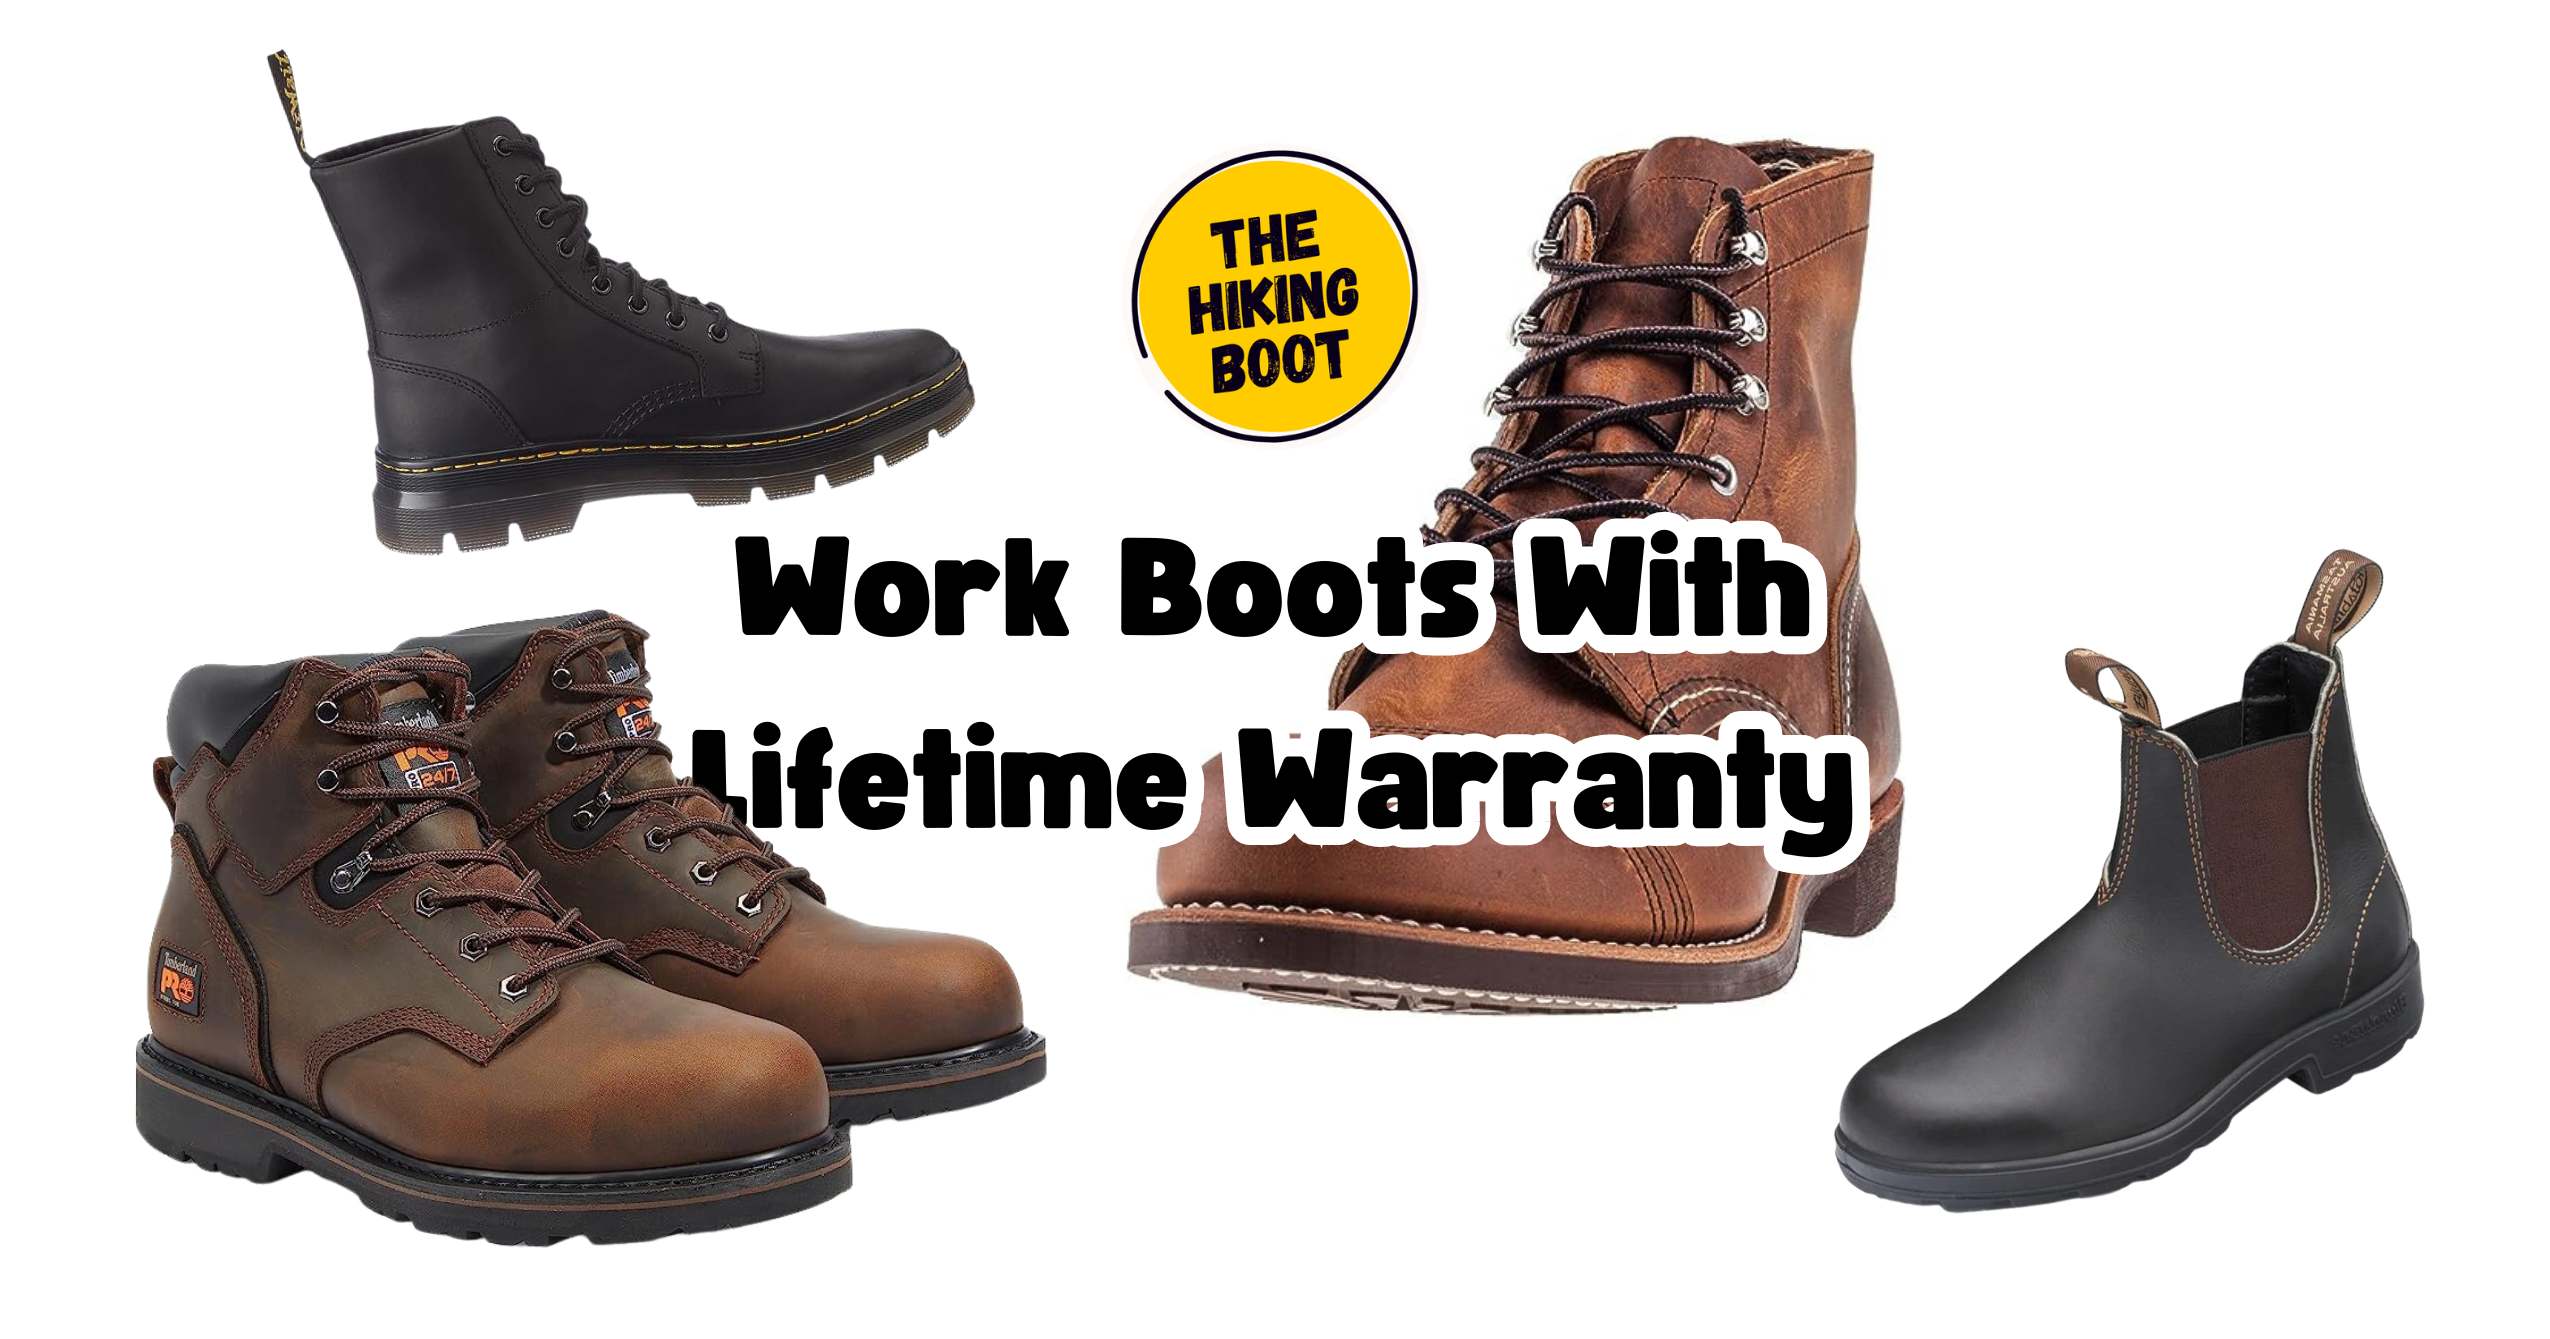 Top 10 Best Work Boots With Lifetime Warranty – The Hiking Boot